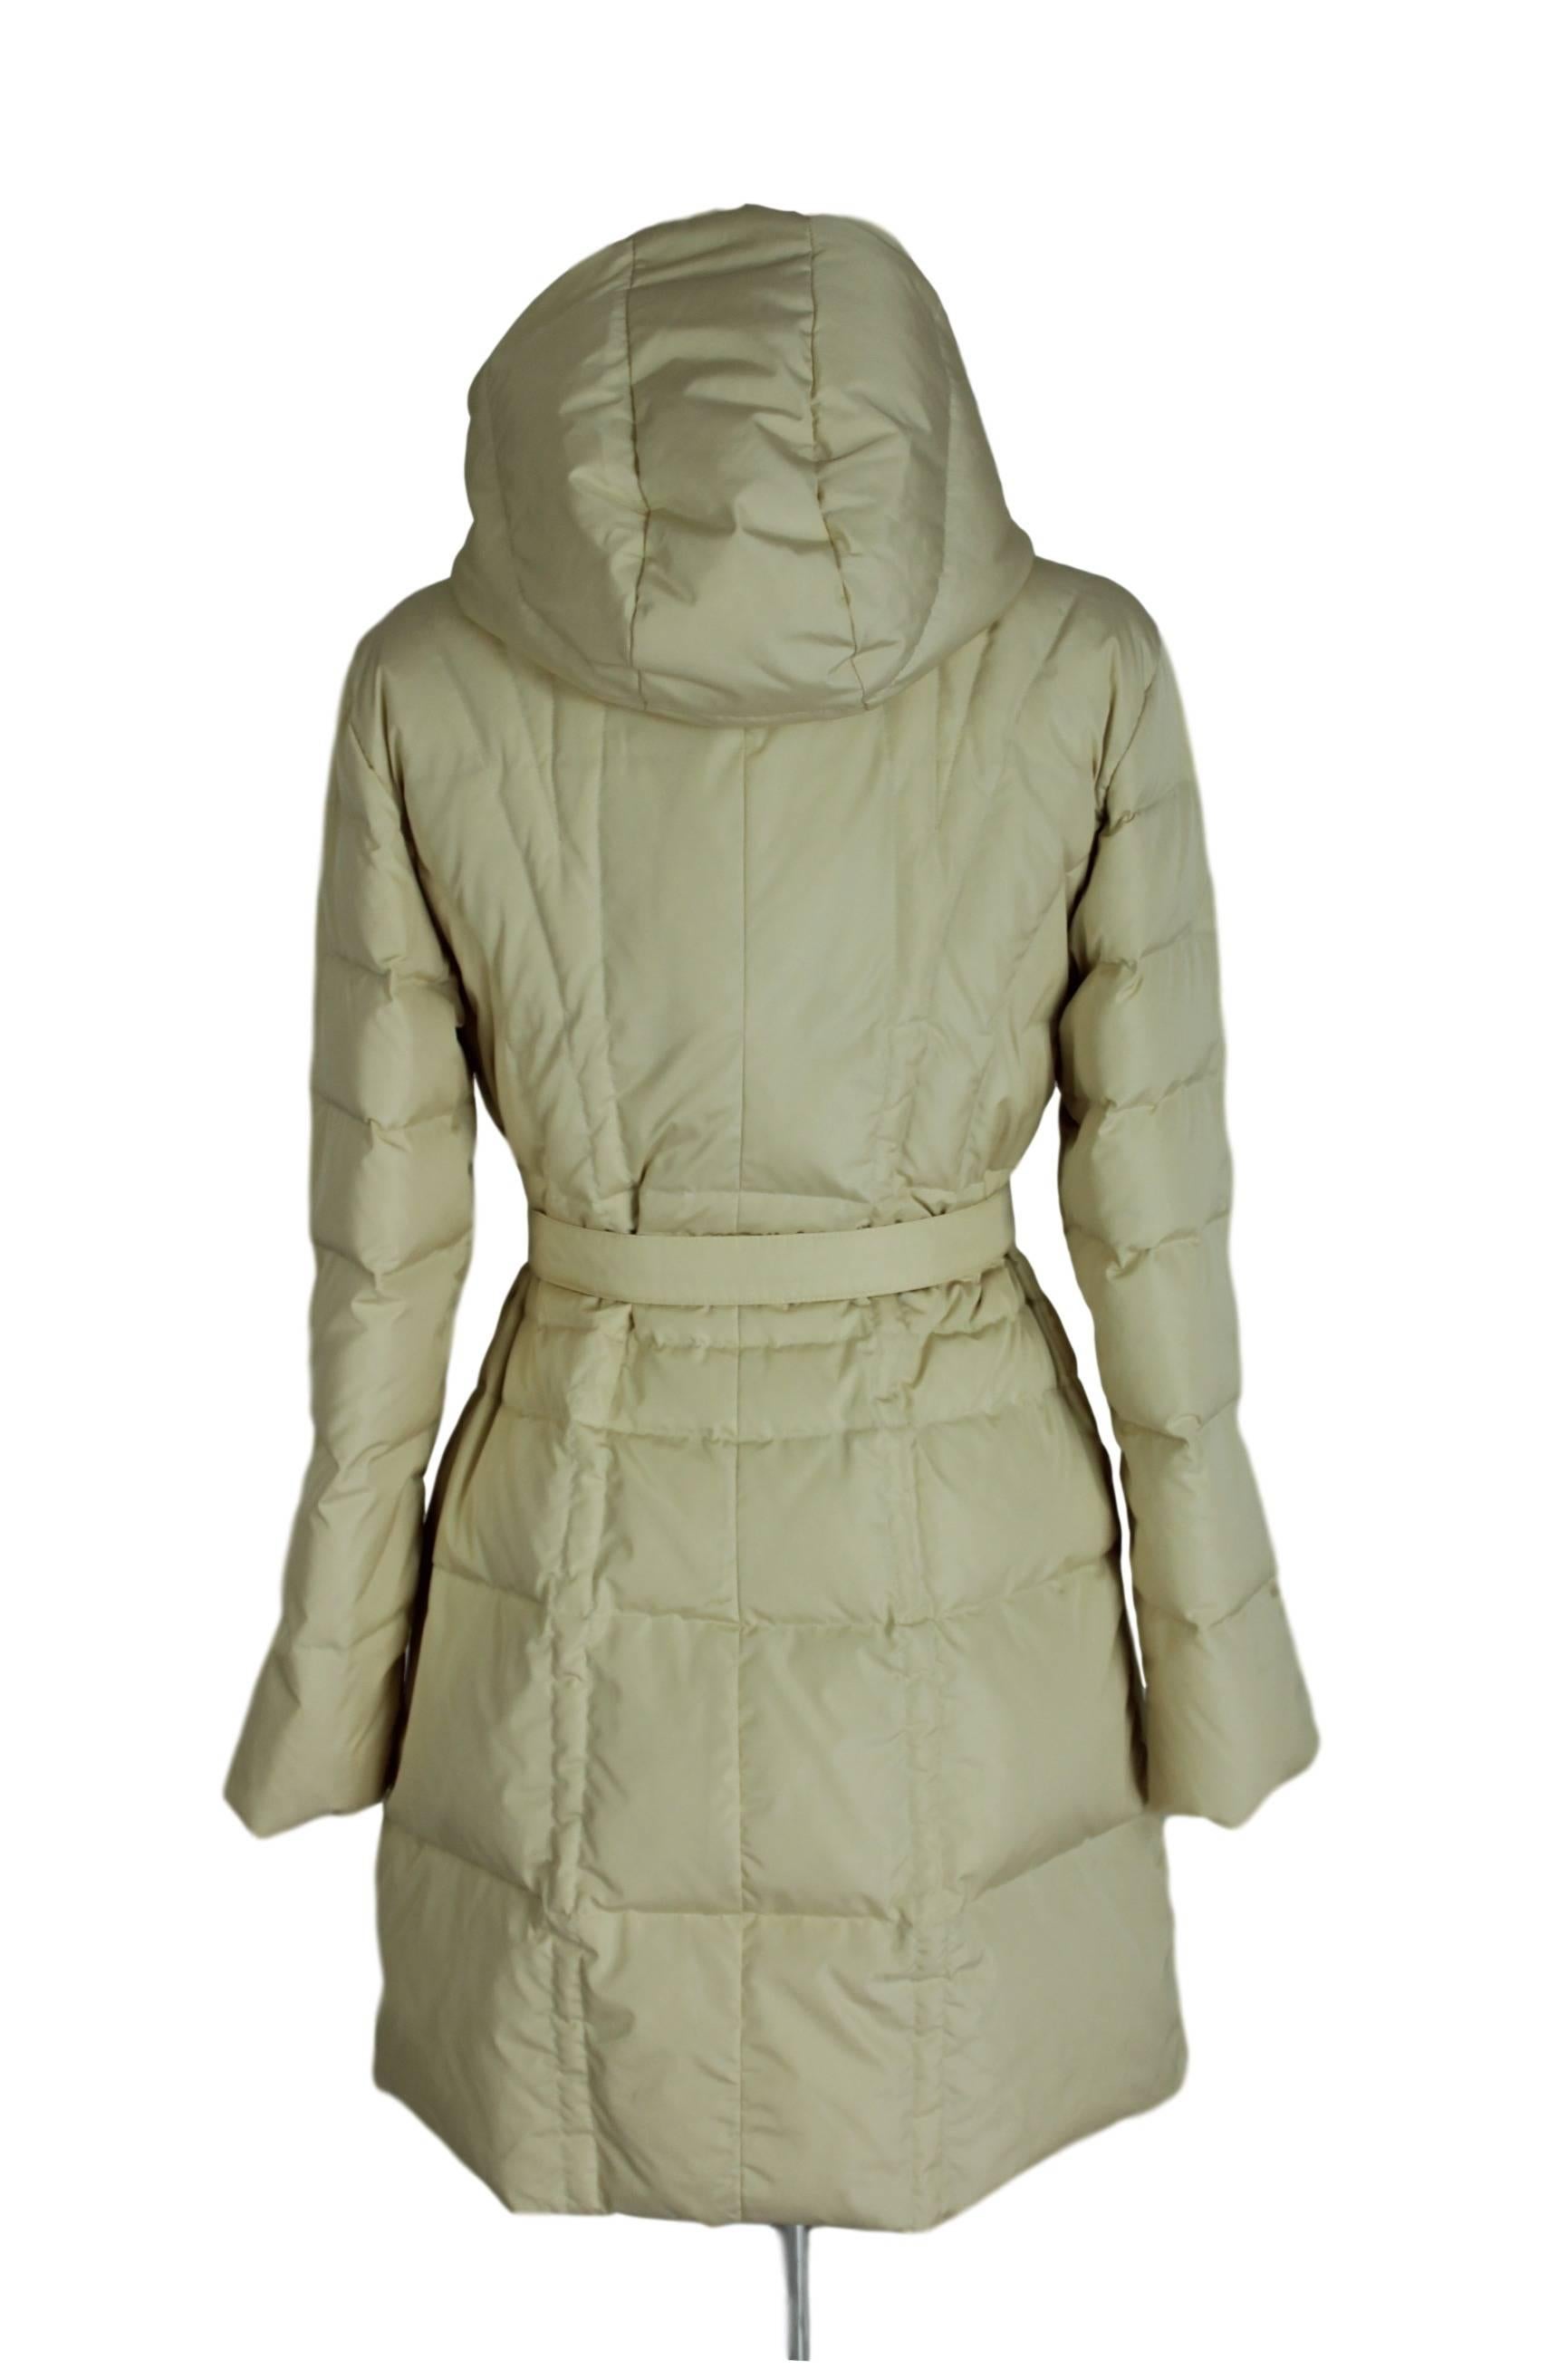 Moncler down jacket women white pearl with two hip pockets, closure with double slider zip and belted waist, removable hood.

Size: 1 
Measures:
Shoulders: 42 cm
Armpit to armpit: 46 cm
Total lenght: 96 cm 
Sleeves: 58 cm
Condition: excellent